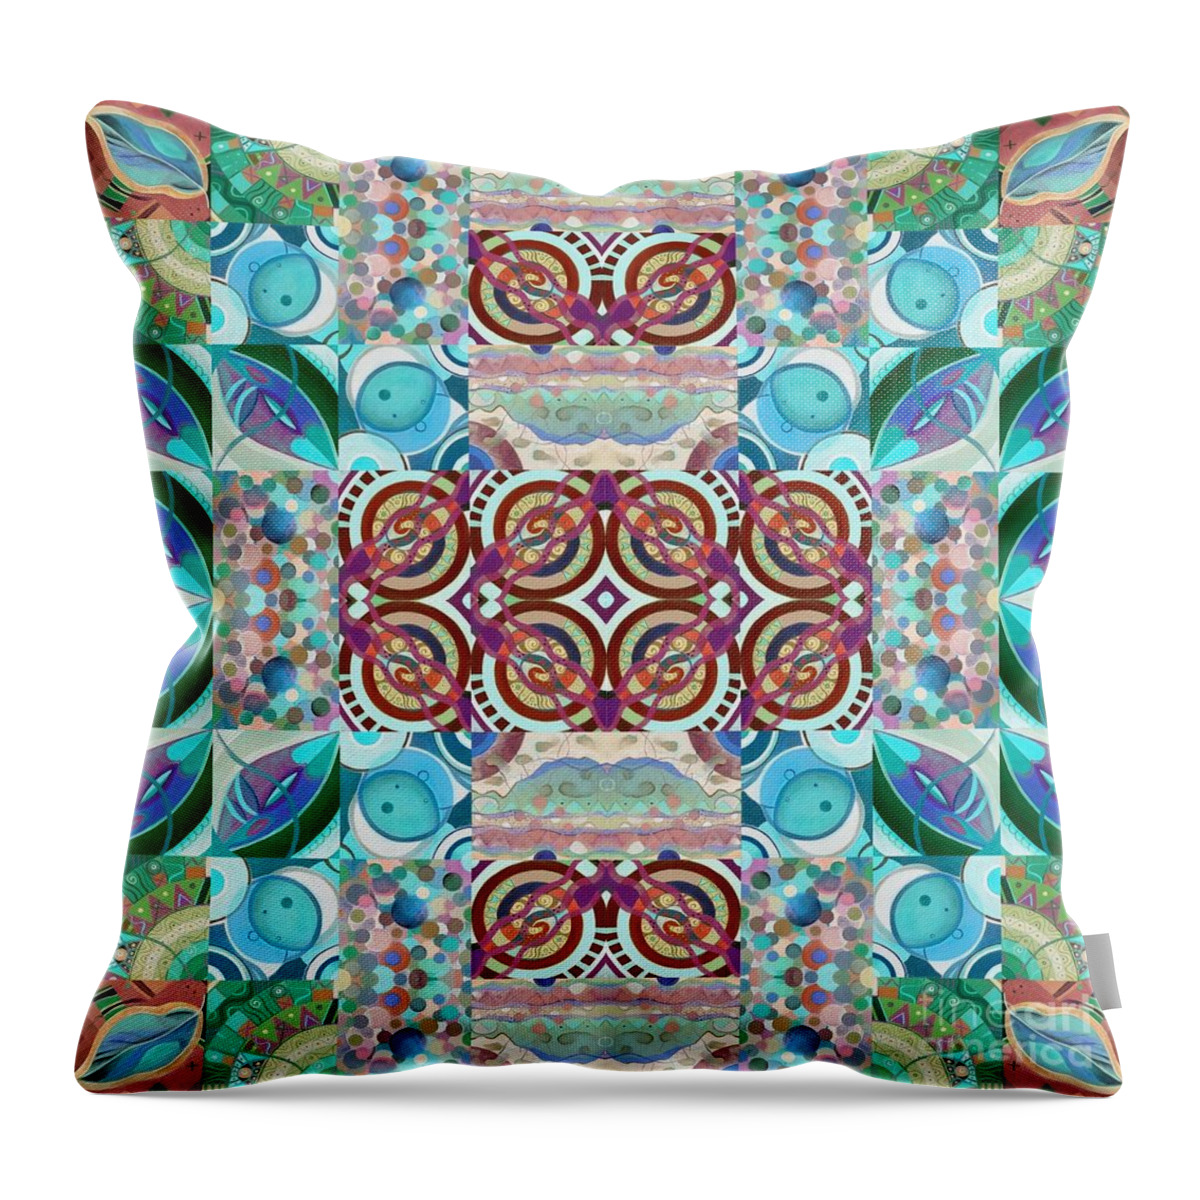 The Joy Of Design Mandala Series Puzzle 7 Arrangement 6 By Helena Tiainen Throw Pillow featuring the painting The Joy of Design Mandala Puzzle Series 7 Arrangement 6 Inverted by Helena Tiainen